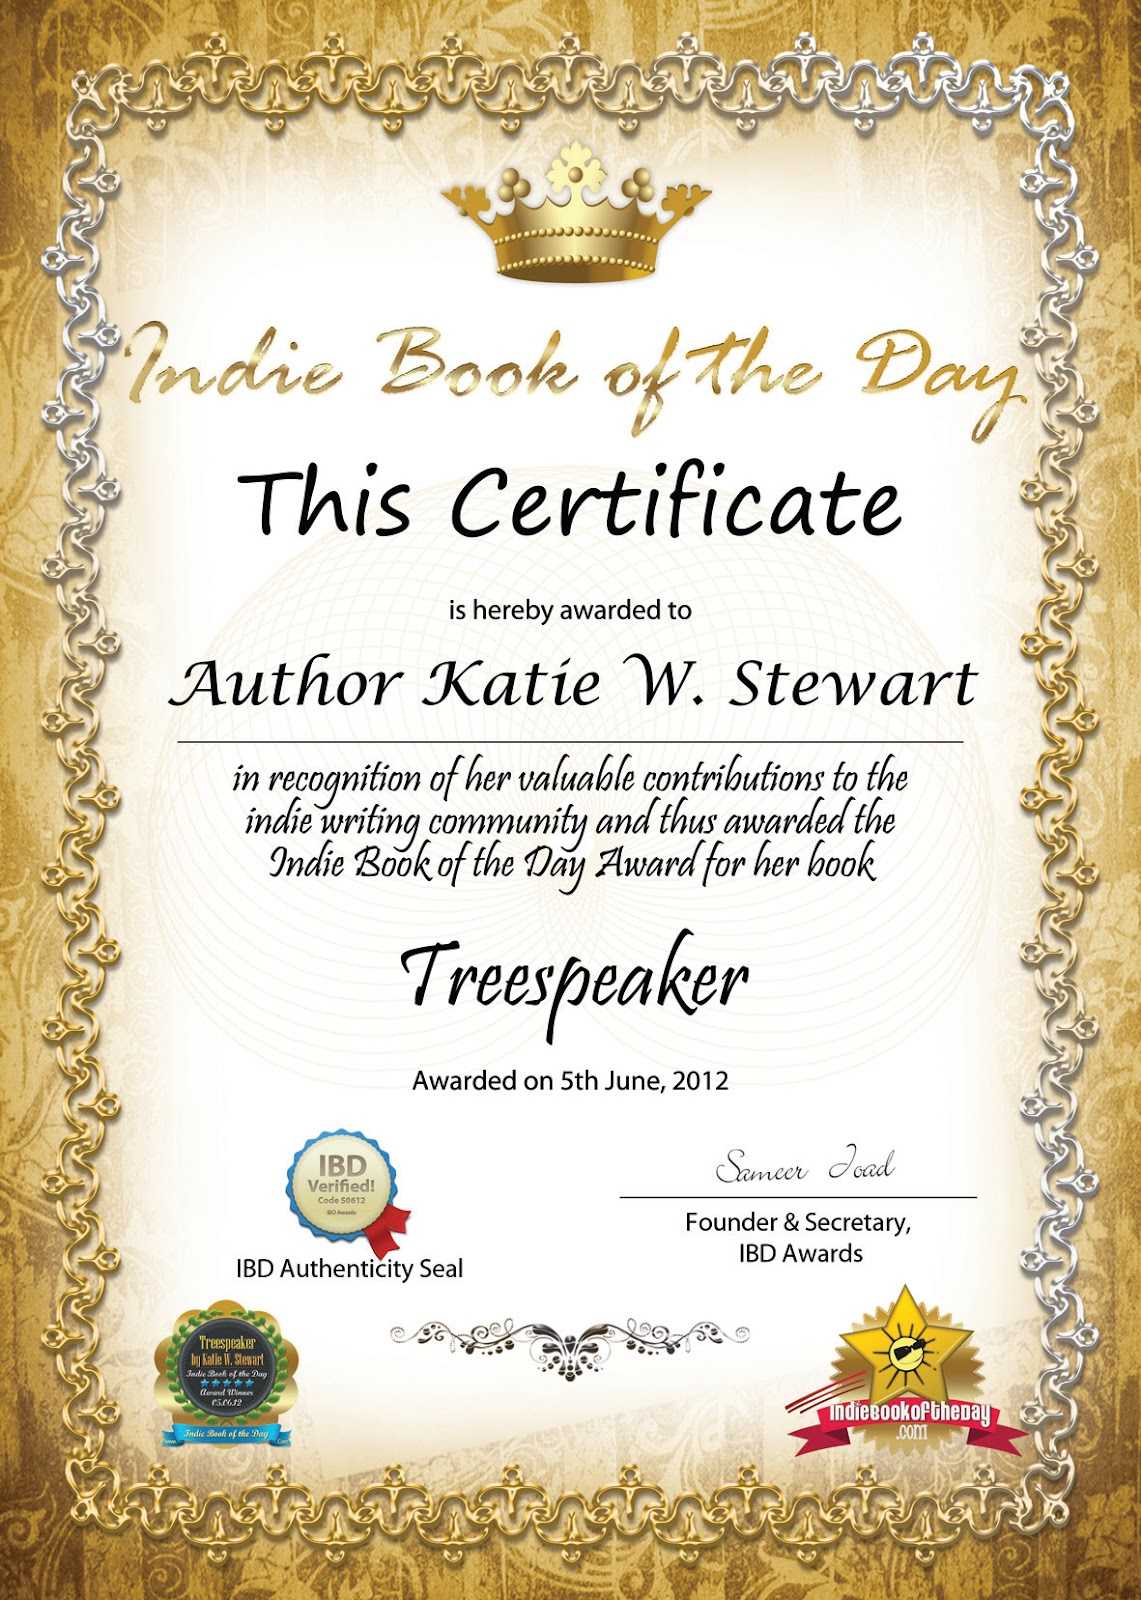 Small Certificate Template ] - Free Gift Certificate Within Small Certificate Template